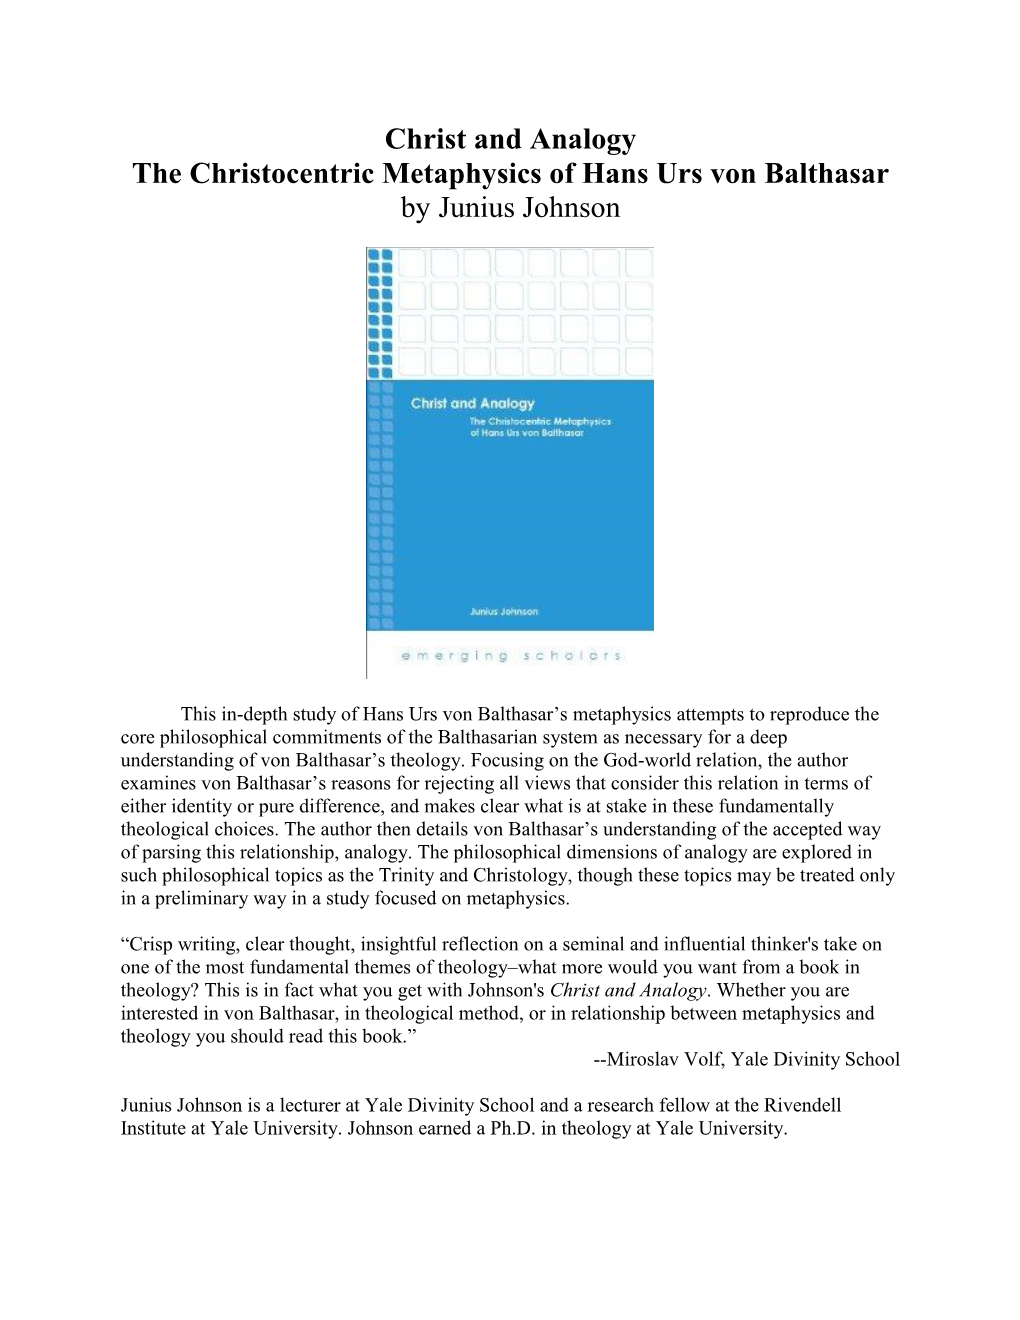 Christ and Analogy the Christocentric Metaphysics of Hans Urs Von Balthasar by Junius Johnson